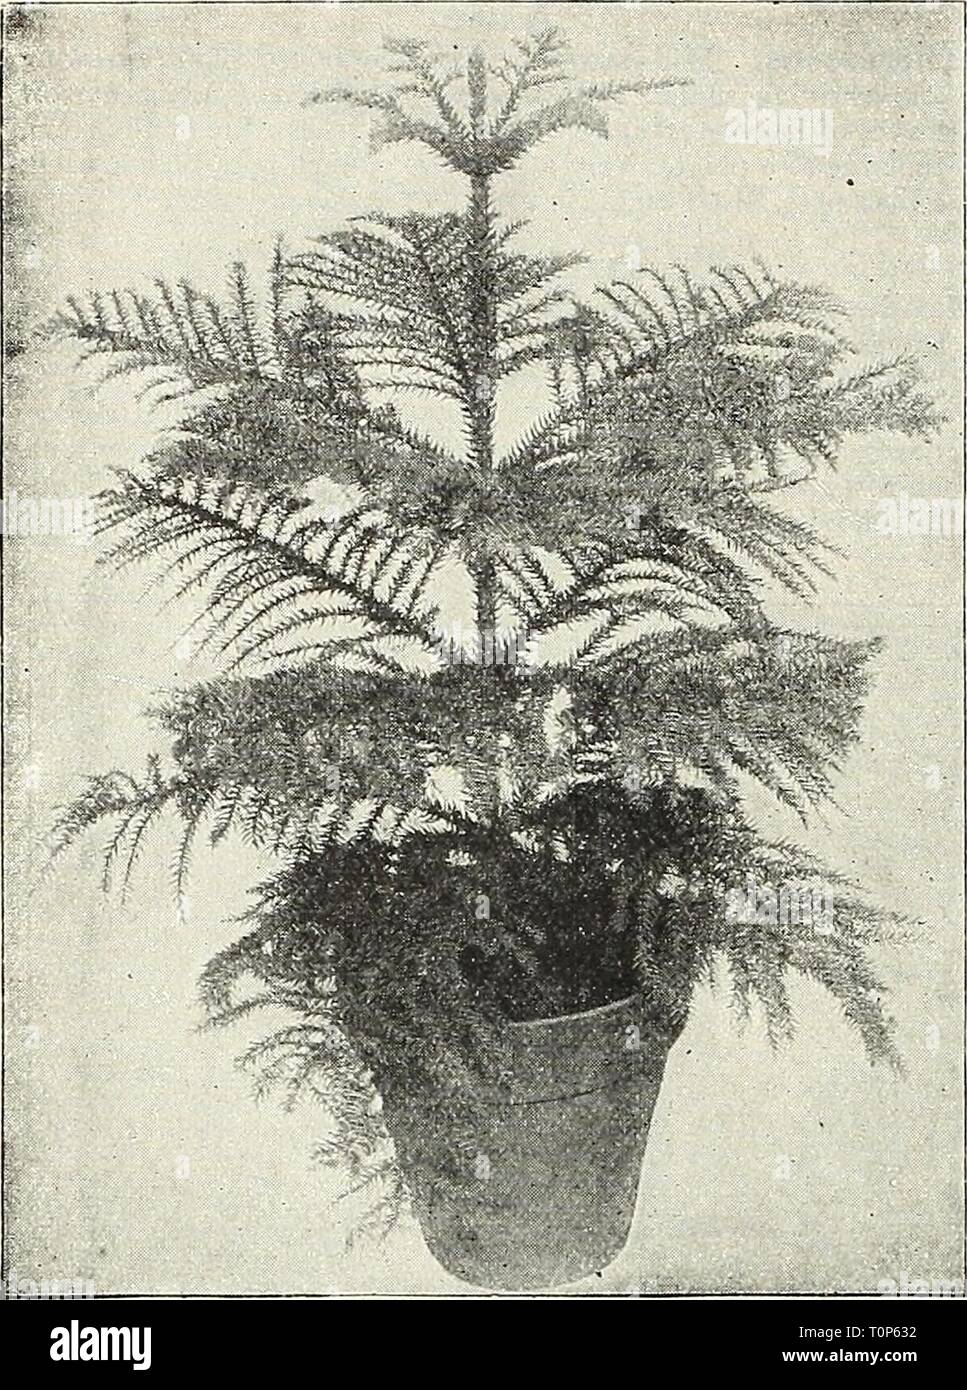 Dreer's autumn catalogue 1931 (1931) Dreer's autumn catalogue 1931  dreersautumncata1931henr Year: 1931  22 pJEAjgjj .QARDENflw GREENHOUSE PLANTS 'fflLMtM    Araucaria Excelsa Ardisia Crenulata. A very ornamental greenhouse plant with dark green, glossy, attractive foliage, bearing clusters of very brilliant red berries. A good subject for the window garden. Fine plants in 5-inch pots that will fruit this season. $2.00 each. Asparagus Plumosus Nanus (Asparagus Fern). There is no better plant for table decoration than this. The foliage is more delicate than that of the finest Fern, being lace-l Stock Photo